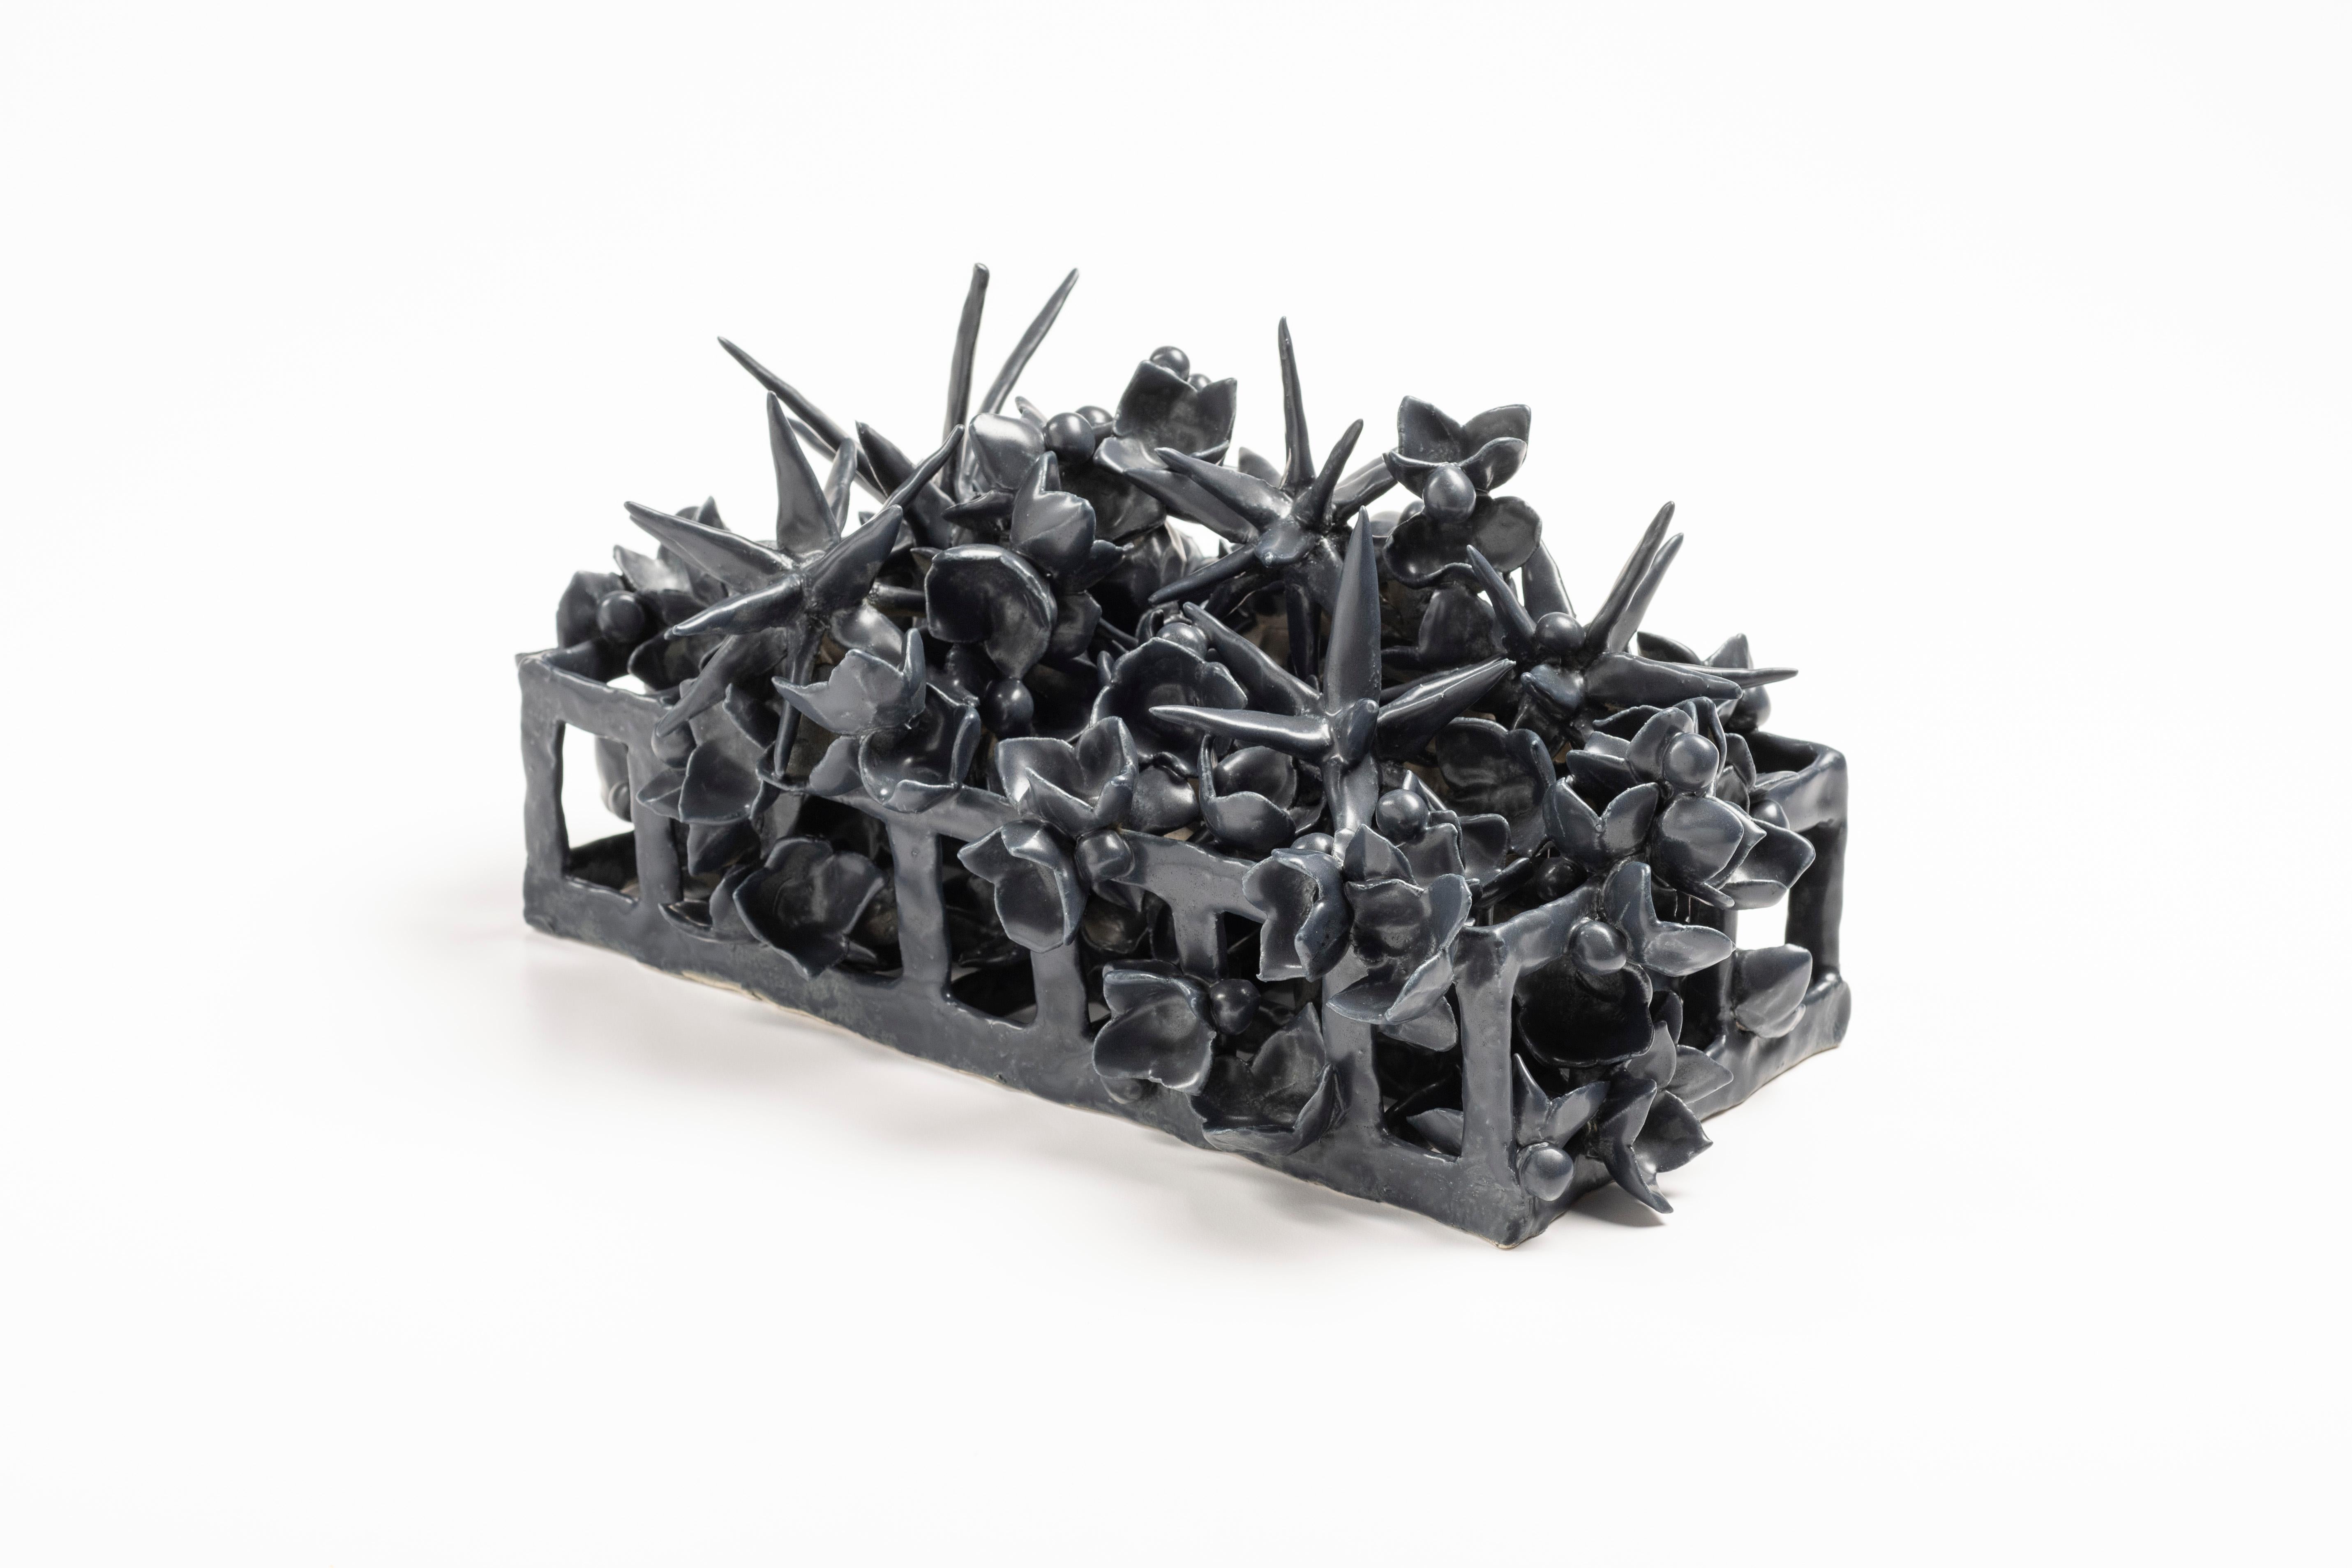 Contemporary Joanna Poag Binding Time (Black Grid with Stars) Ceramic Sculpture, 2020 For Sale